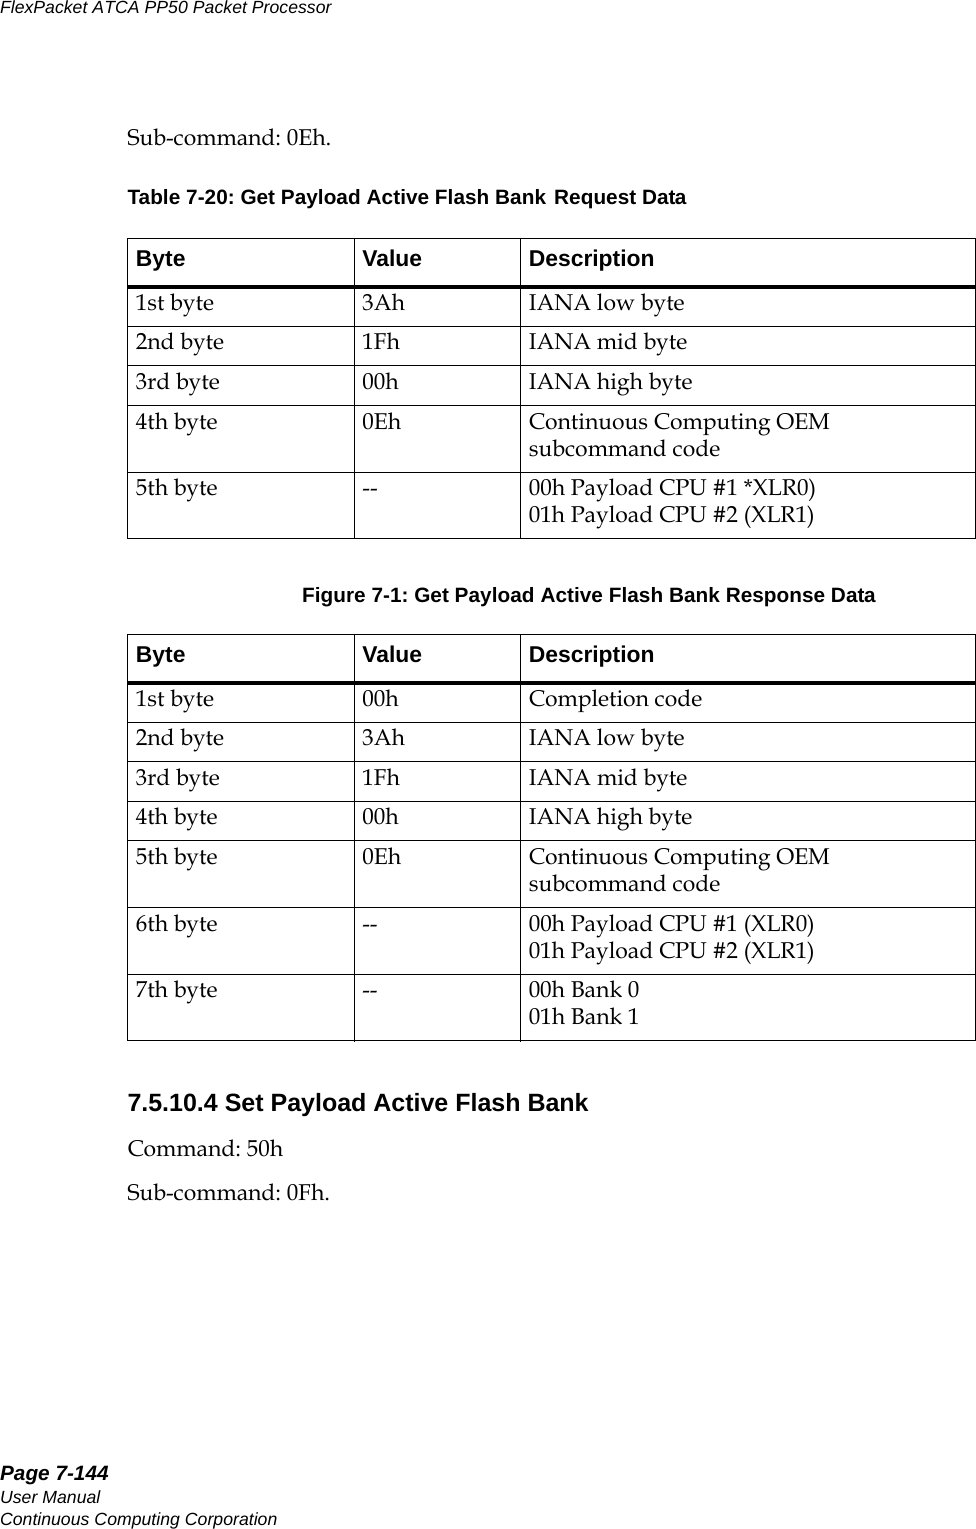 Page 7-144User ManualContinuous Computing CorporationFlexPacket ATCA PP50 Packet Processor     PreliminarySub-command: 0Eh.7.5.10.4 Set Payload Active Flash Bank Command: 50hSub-command: 0Fh.Table 7-20: Get Payload Active Flash Bank Request DataByte Value Description1st byte 3Ah IANA low byte2nd byte 1Fh IANA mid byte3rd byte 00h IANA high byte4th byte 0Eh Continuous Computing OEM subcommand code5th byte -- 00h Payload CPU #1 *XLR0)01h Payload CPU #2 (XLR1)Figure 7-1: Get Payload Active Flash Bank Response DataByte Value Description1st byte 00h Completion code2nd byte 3Ah IANA low byte3rd byte 1Fh IANA mid byte4th byte 00h IANA high byte5th byte 0Eh Continuous Computing OEM subcommand code6th byte -- 00h Payload CPU #1 (XLR0)01h Payload CPU #2 (XLR1)7th byte -- 00h Bank 001h Bank 1